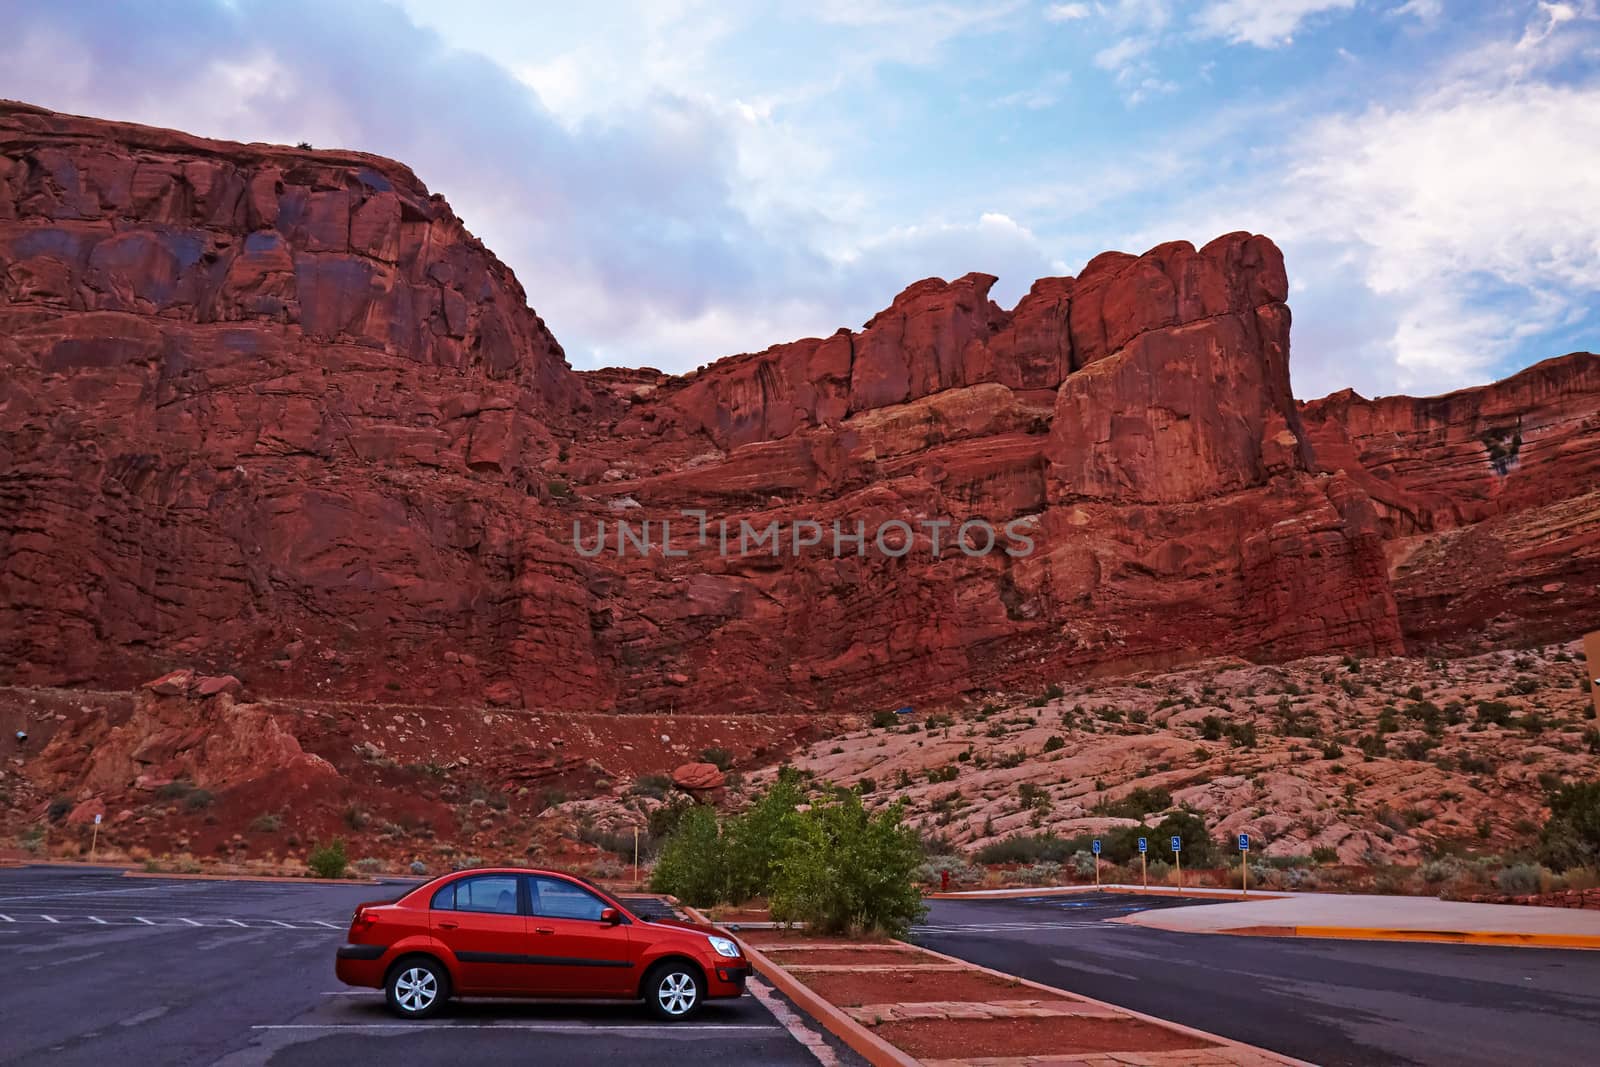 Arches National Park Parking by LoonChild